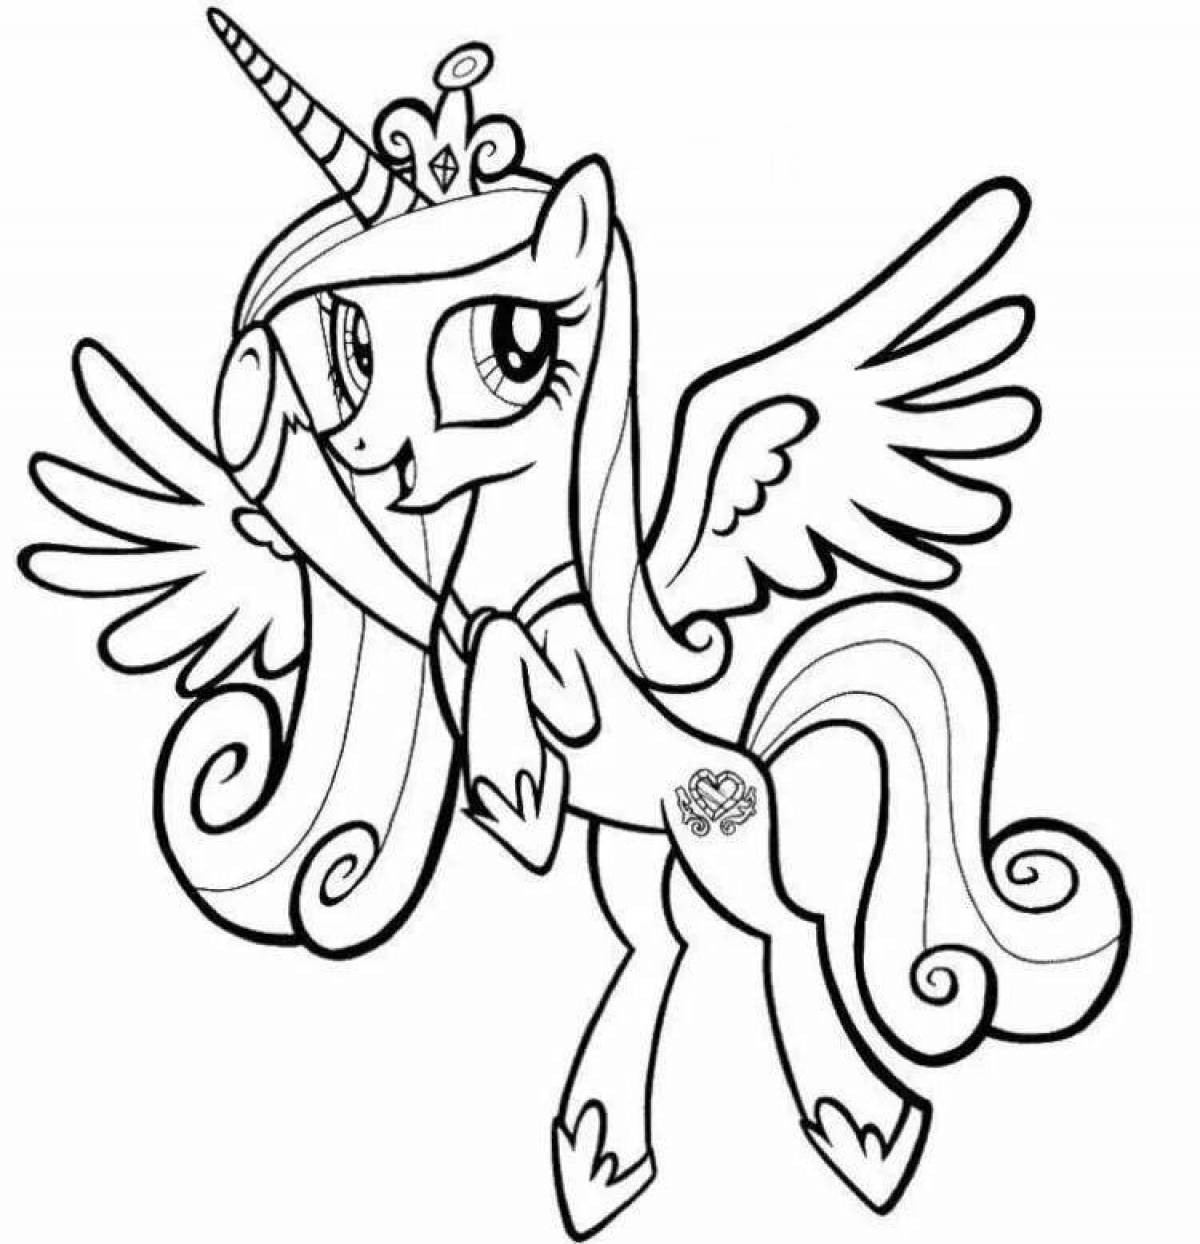 Princess mae little pony dazzling coloring book